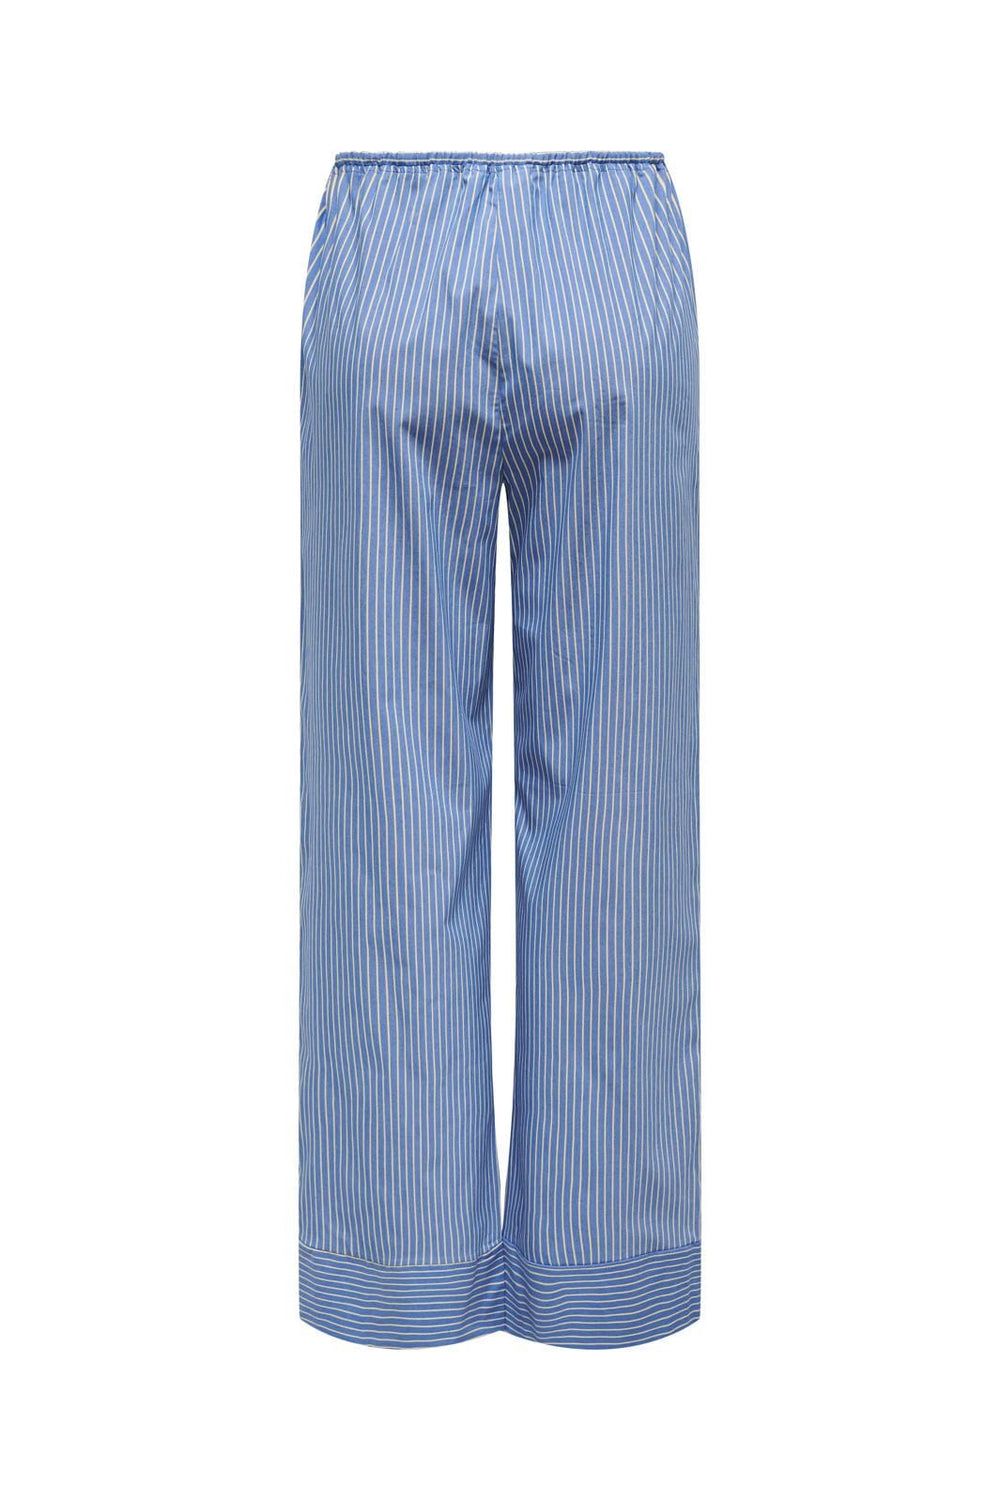 Only - Onlsalvi Wide Stripe Pant - 4465608 Blue Yonder Double Cream